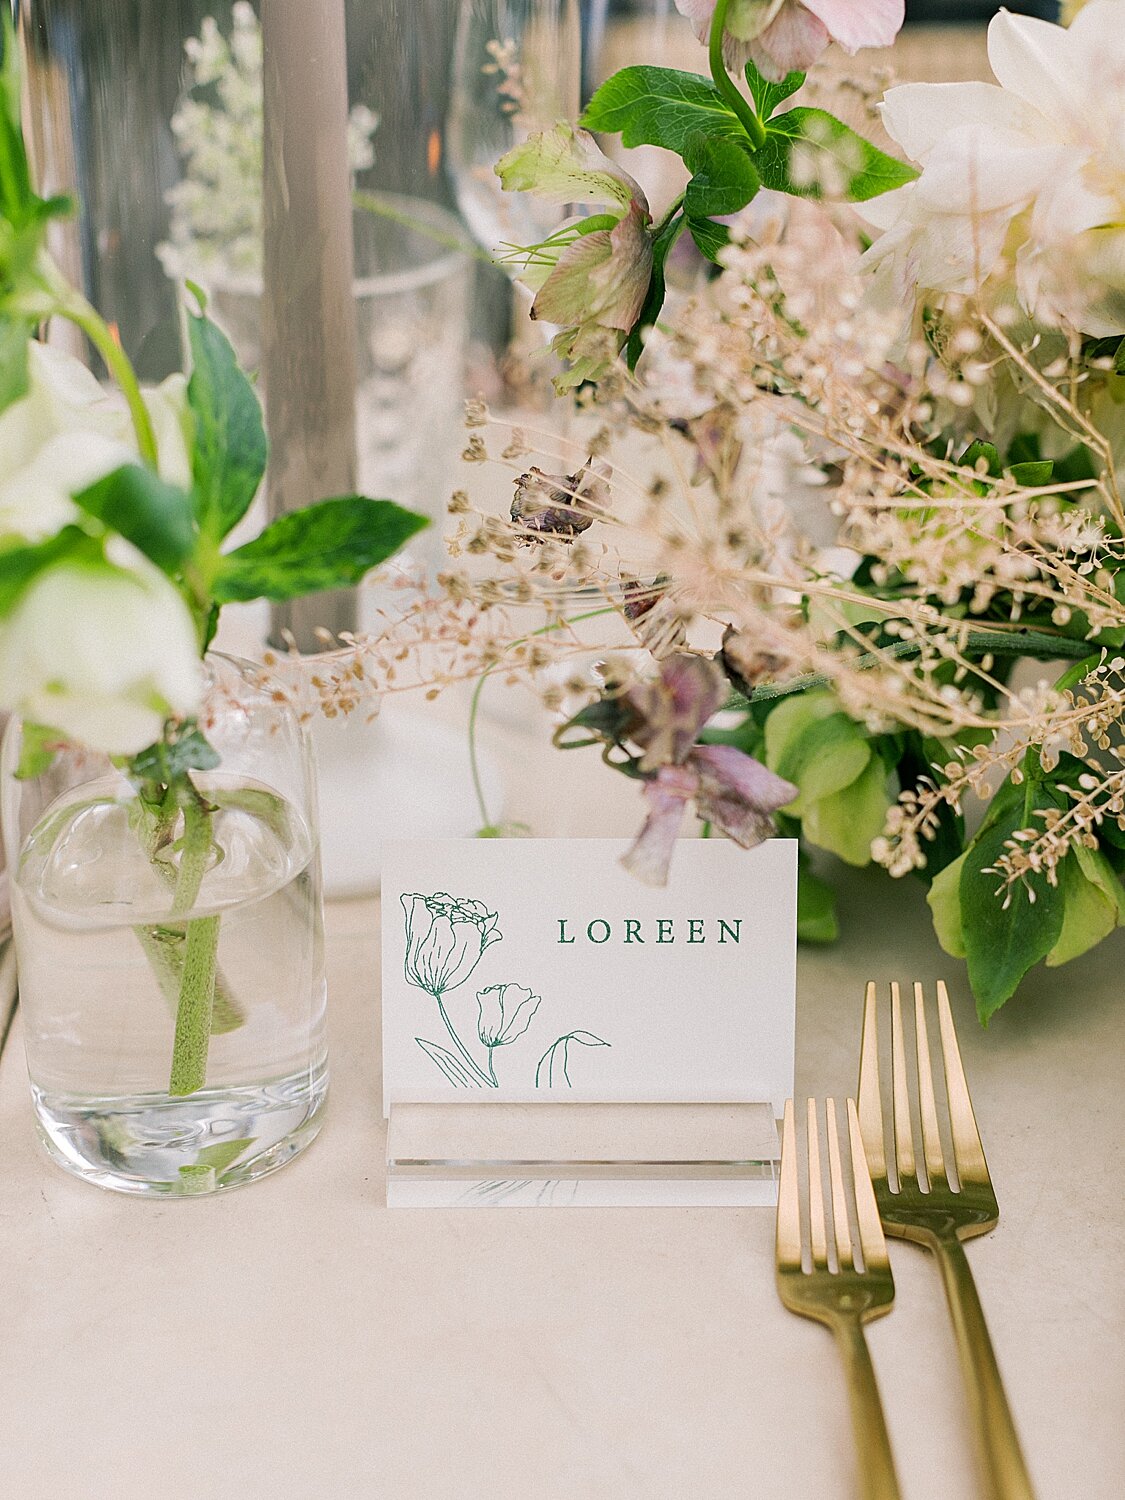 elegant place setting for intimate wedding reception | Asher Gardner Photography | Intimate Ceremony in DUMBO New York